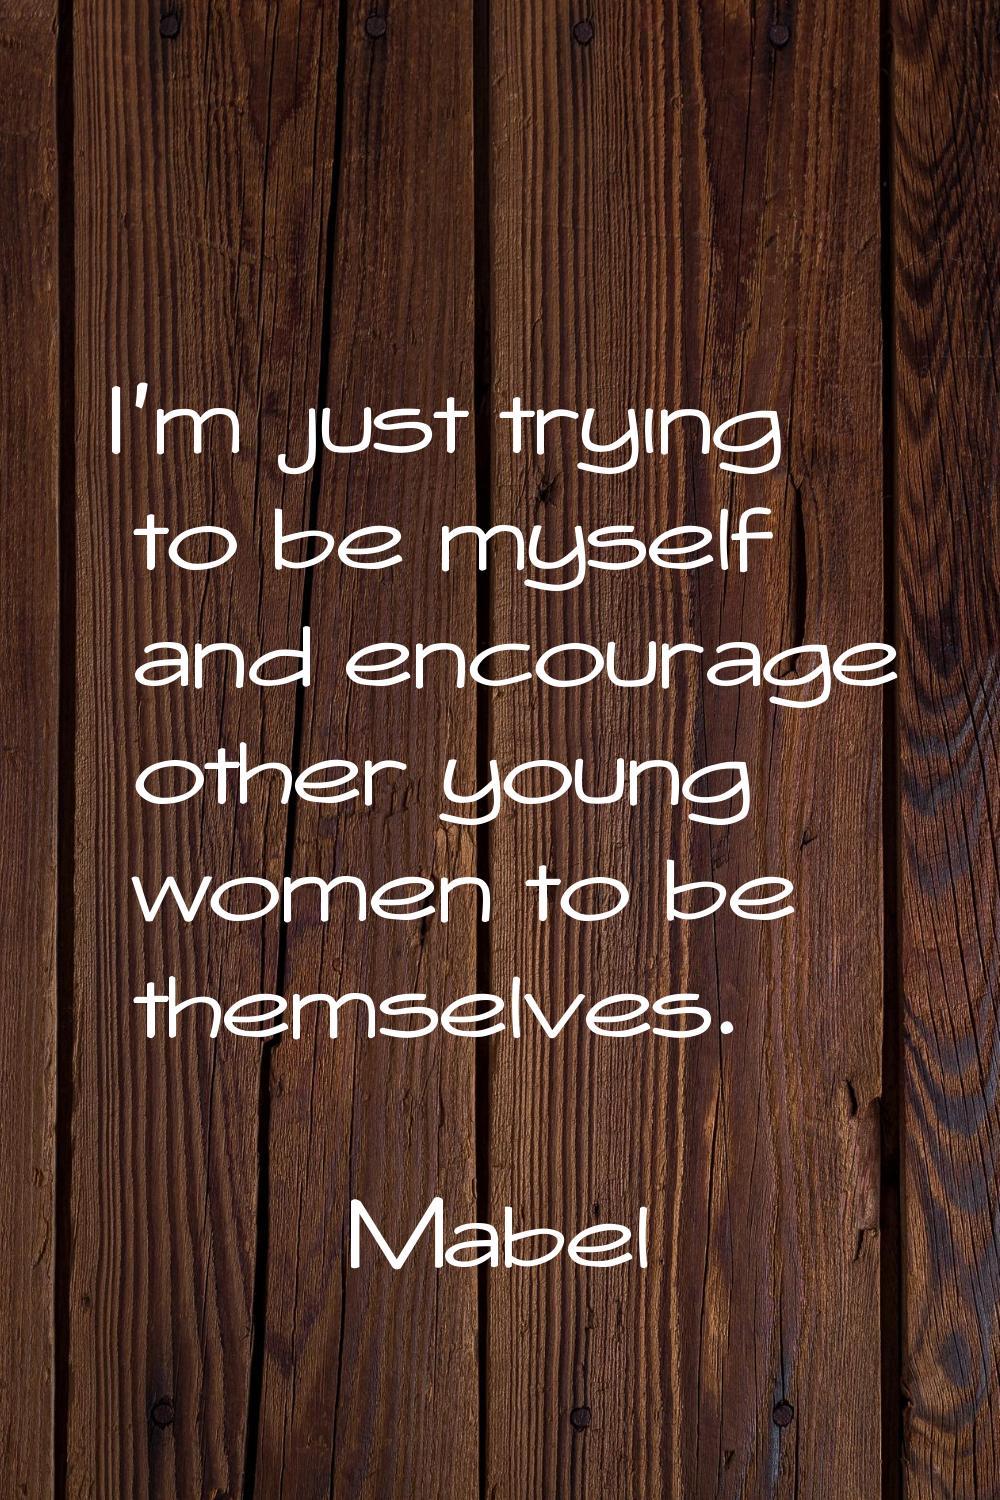 I'm just trying to be myself and encourage other young women to be themselves.